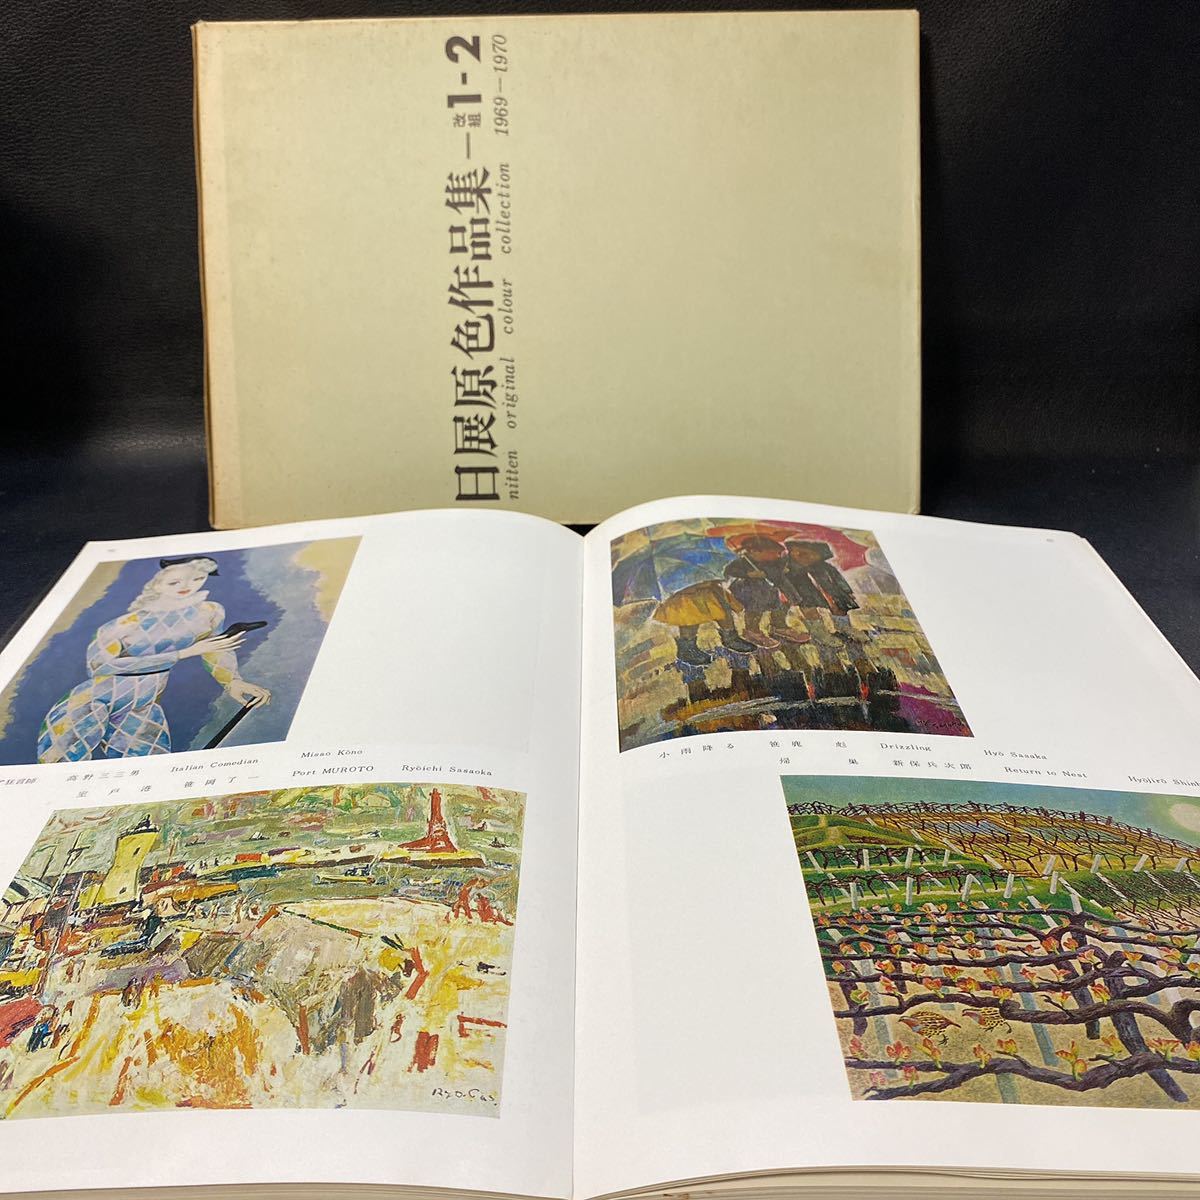  day exhibition . color work compilation 1-2 1969-1970 Japanese picture Western films carving . industrial arts fine art beautiful . publish 